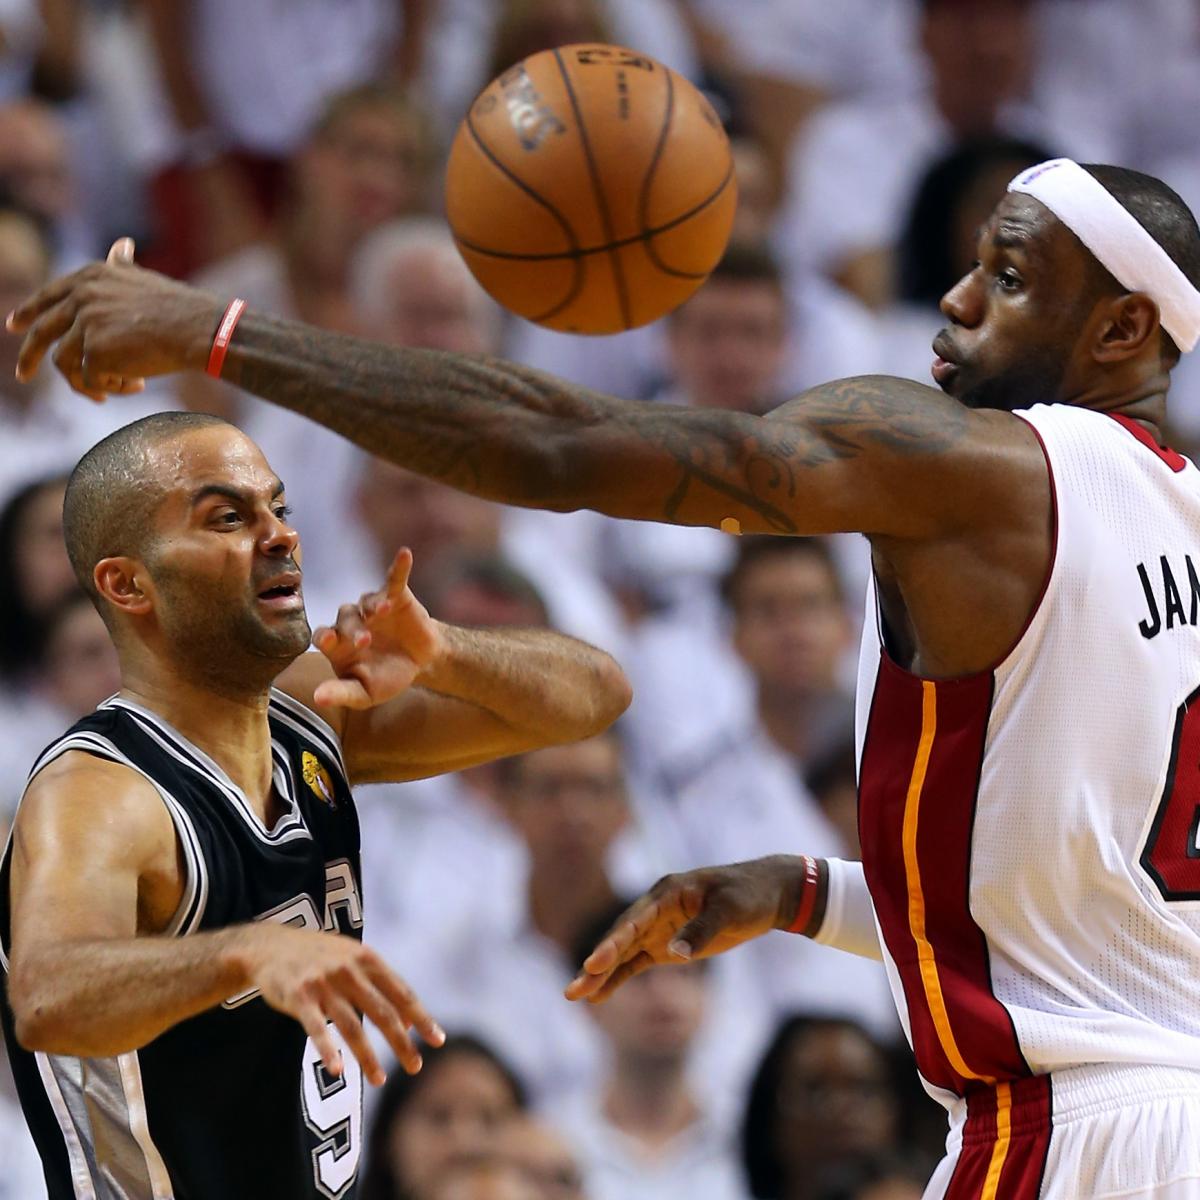 Spurs vs. Heat Game 7: Complete Viewing Guide for Epic 2013 NBA Finals Matchup ...